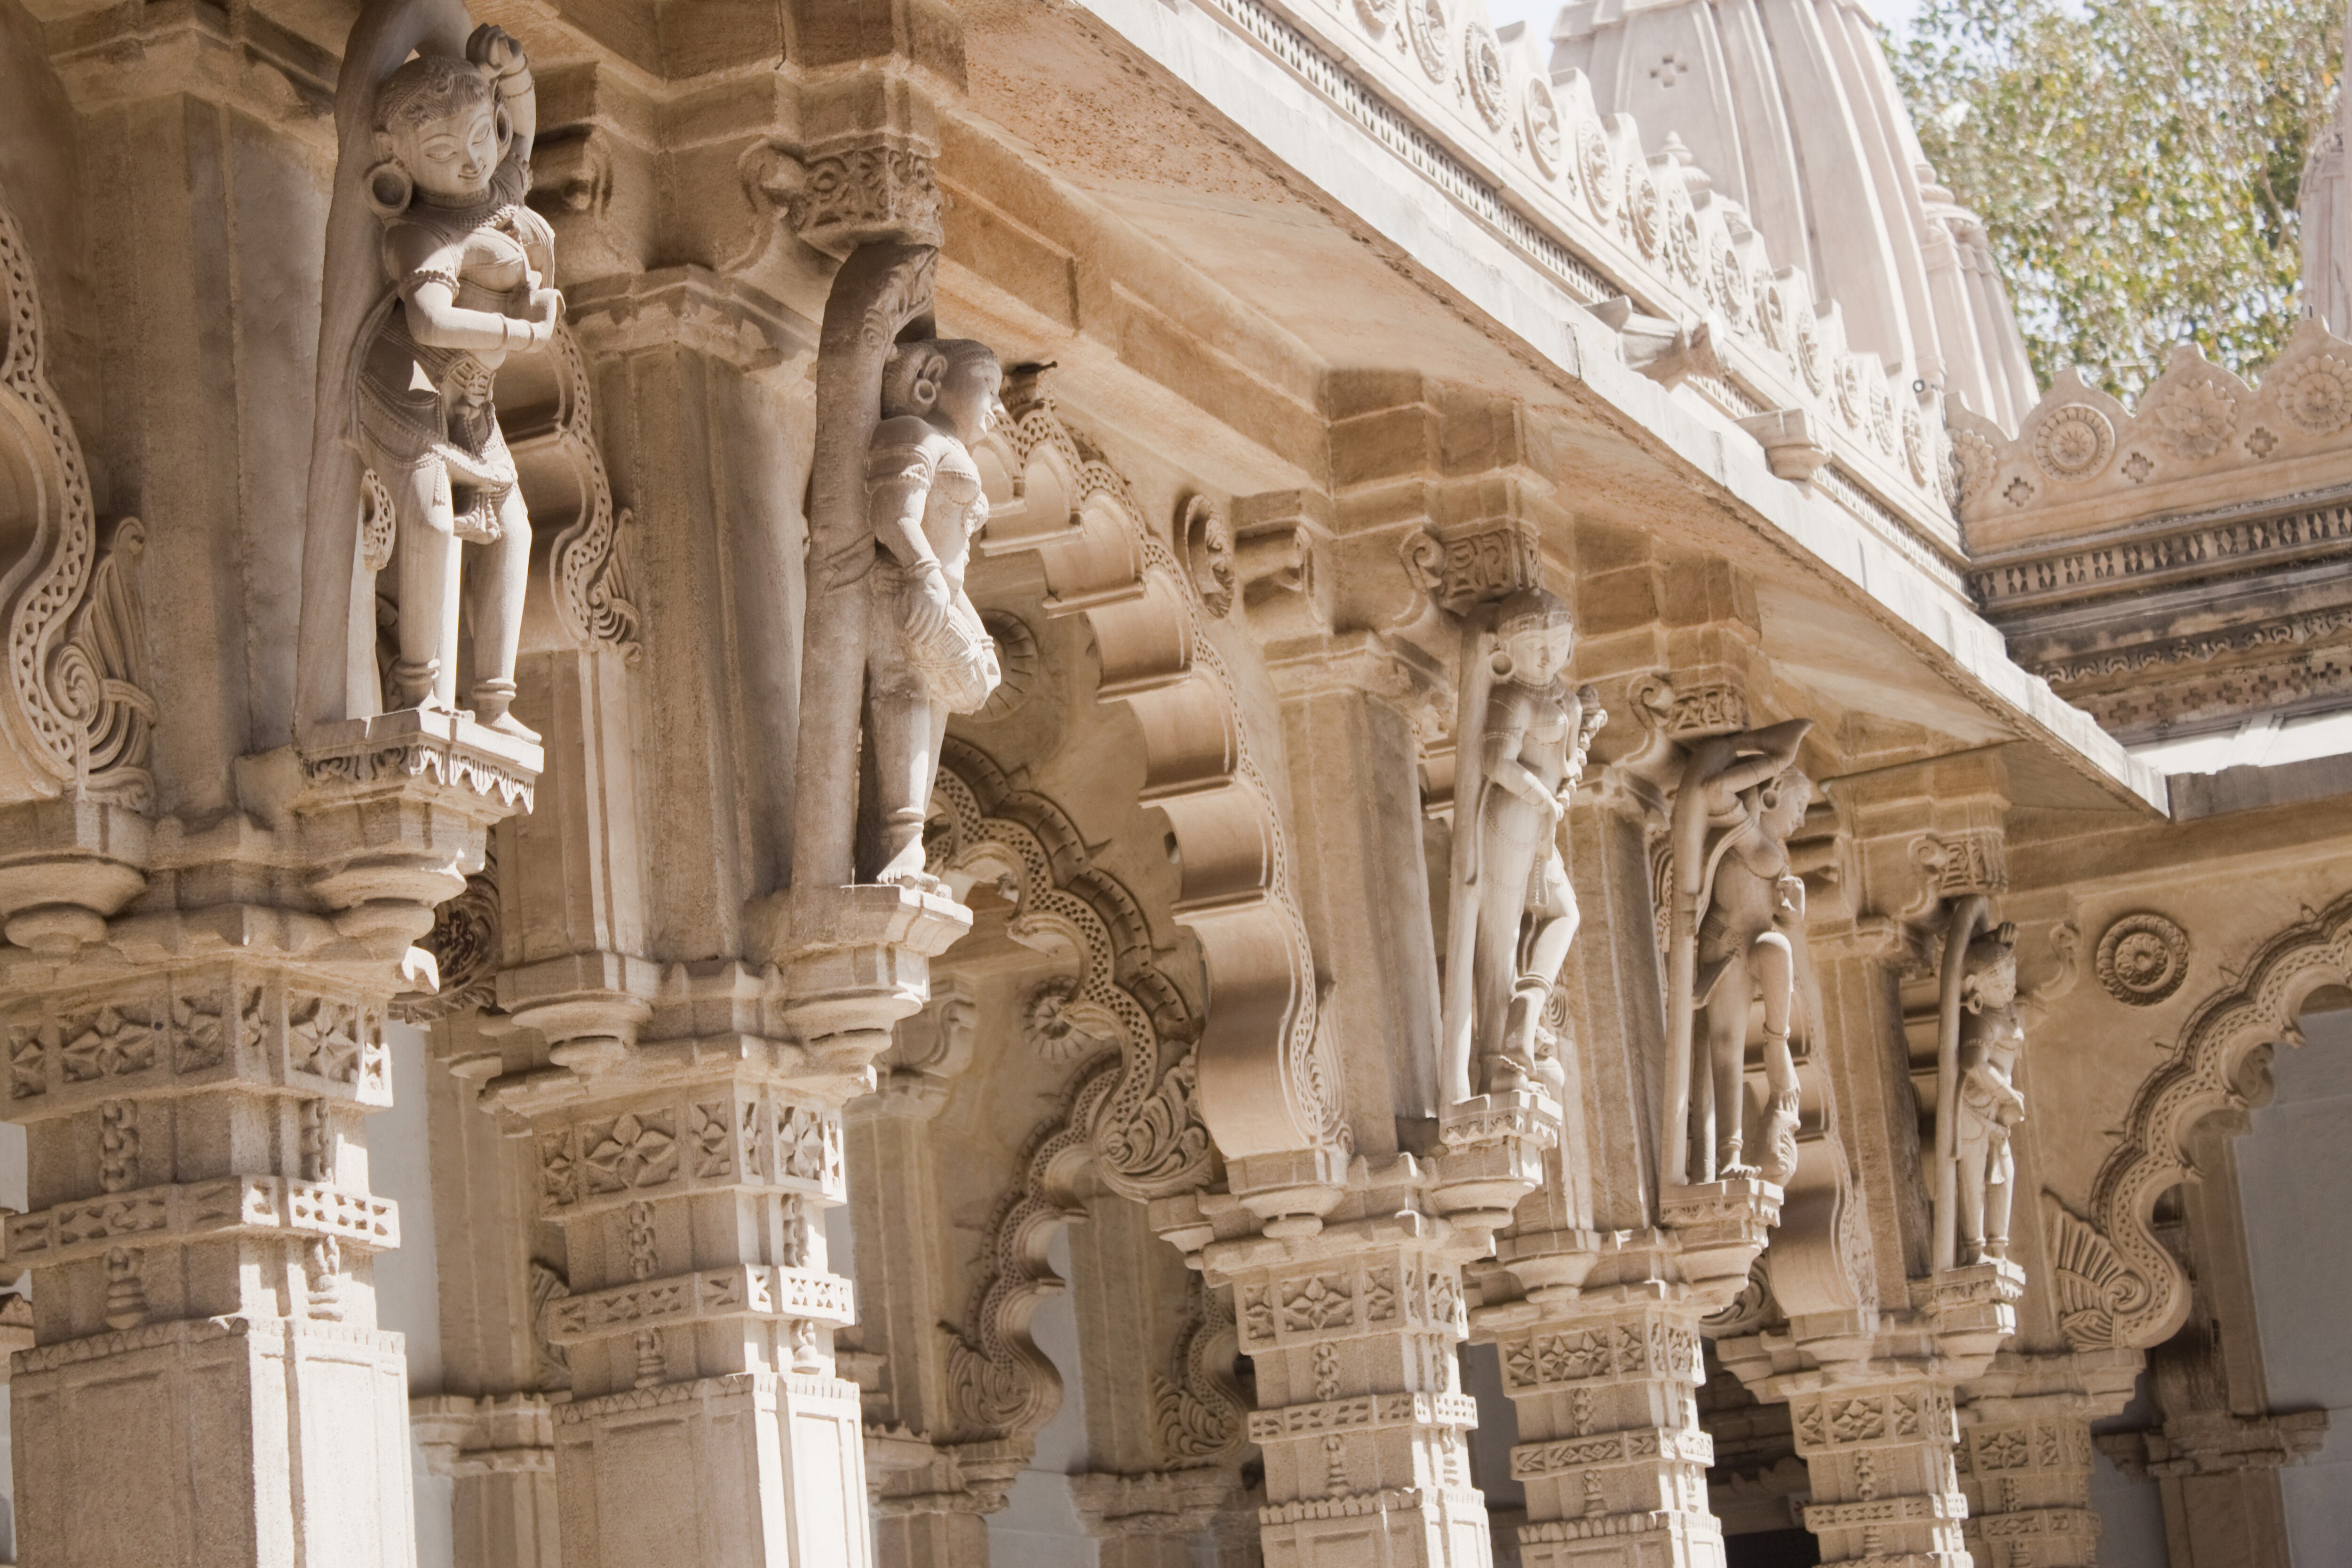 Swaminarayan Temple - One of the Top Attractions in Ahmedabad, India